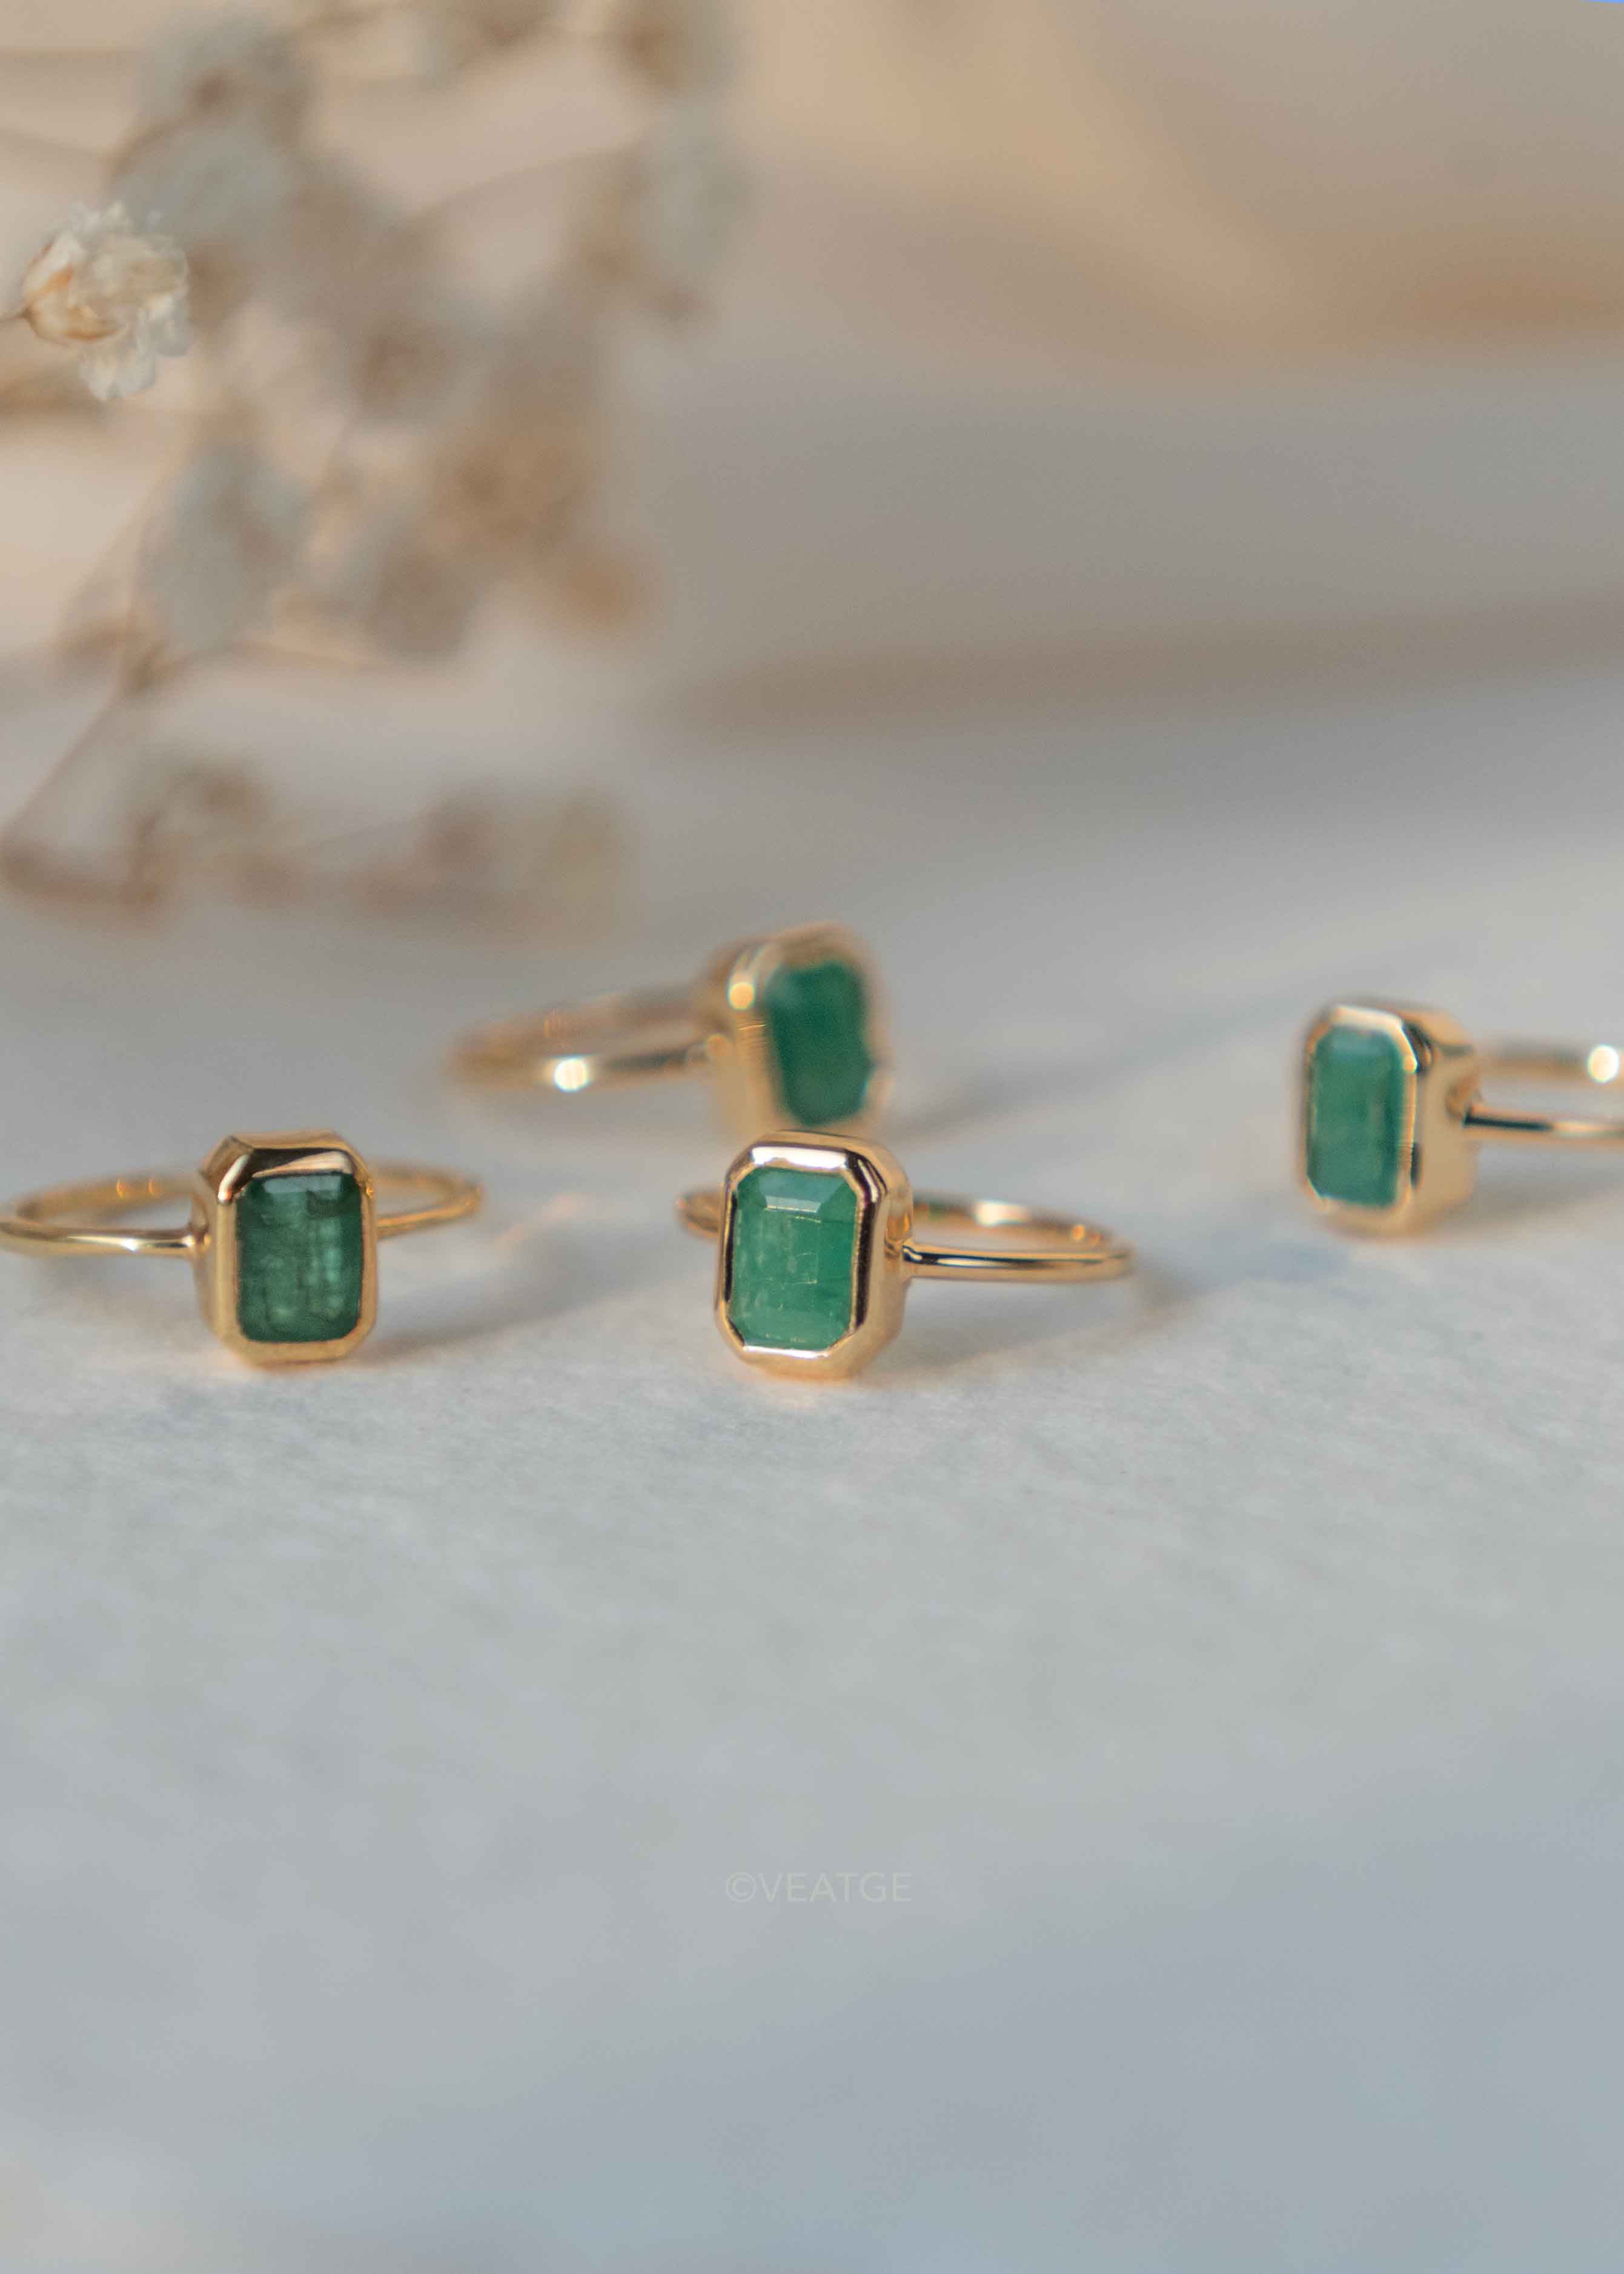 Natural Genuine Emerald Gold Ring May Birthstones Gifts for Women Girls